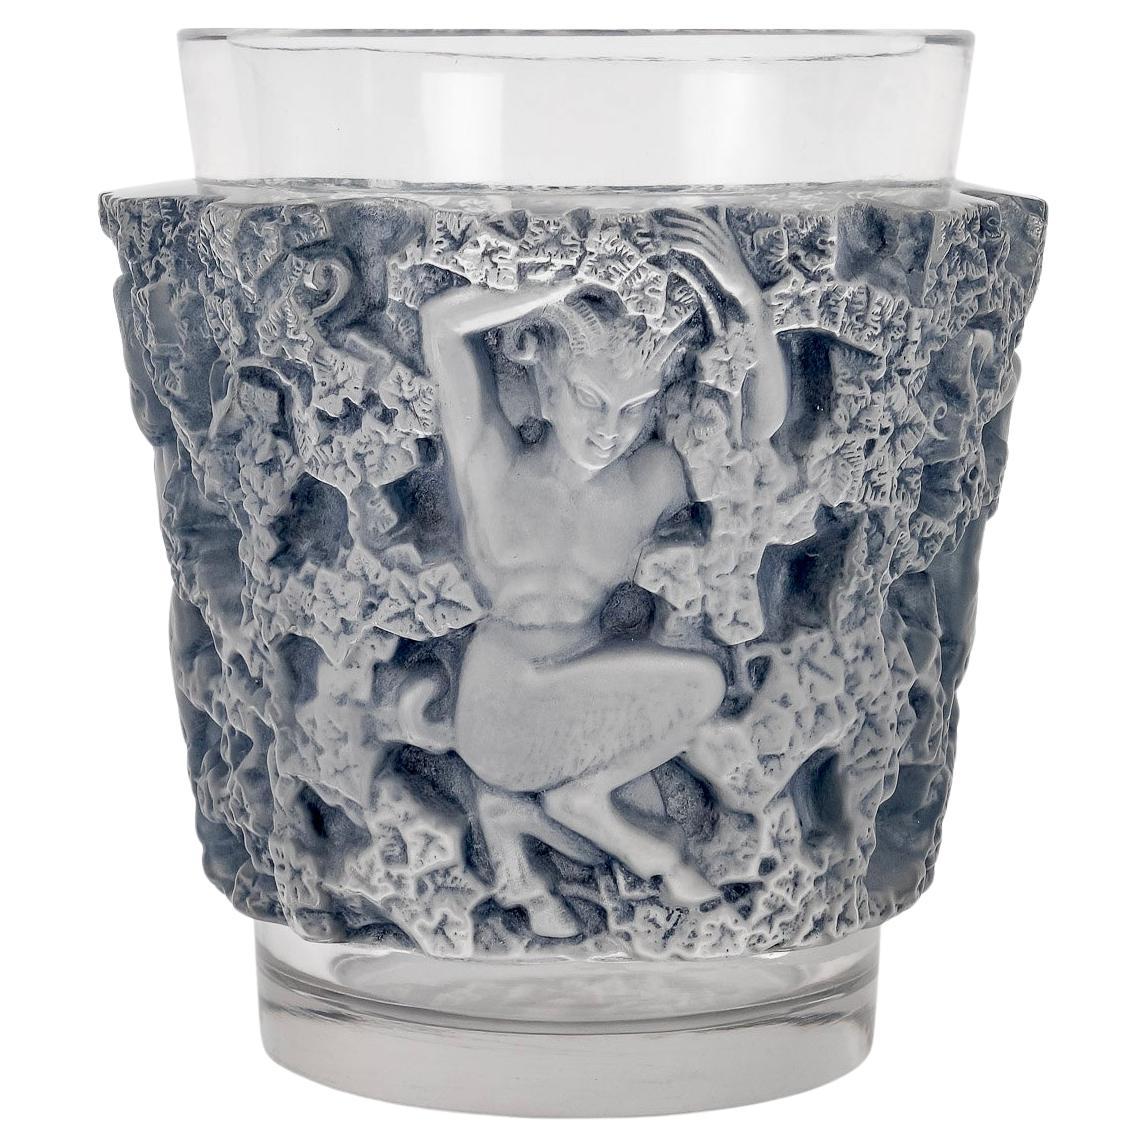 1938 René Lalique Vase Bacchus Frosted Glass with Blue Patina